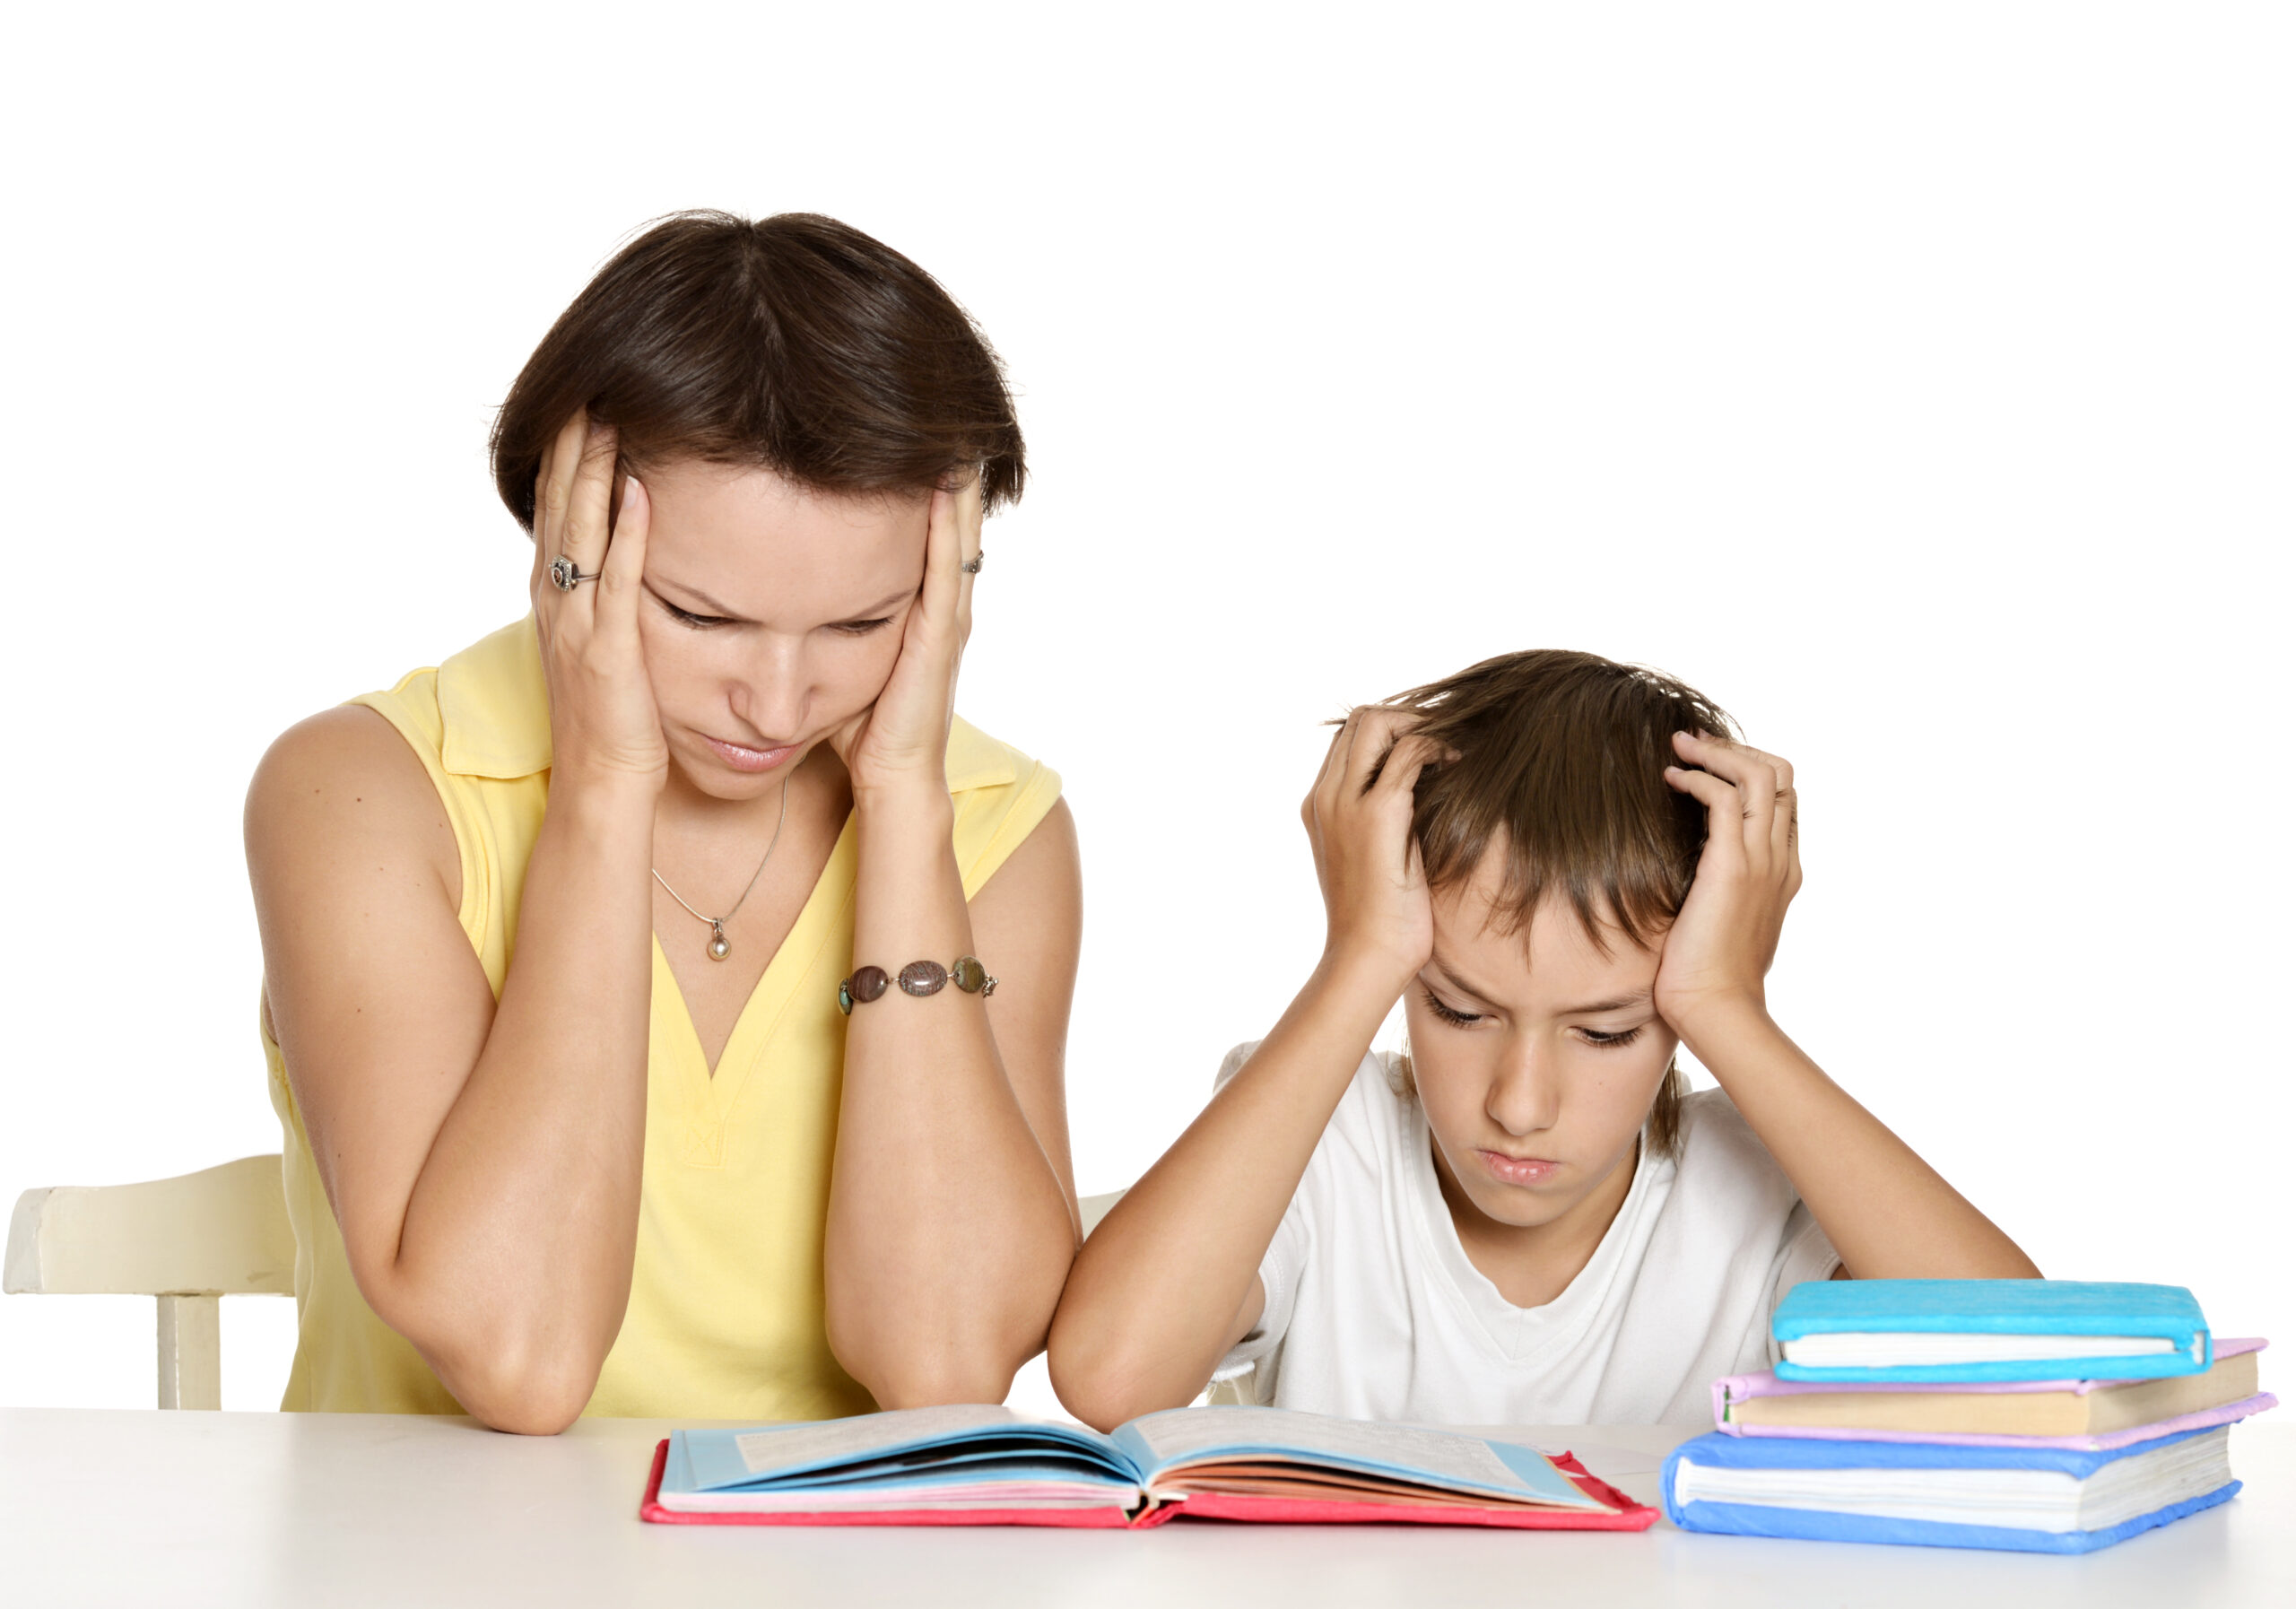 Learn how to manage homework battles